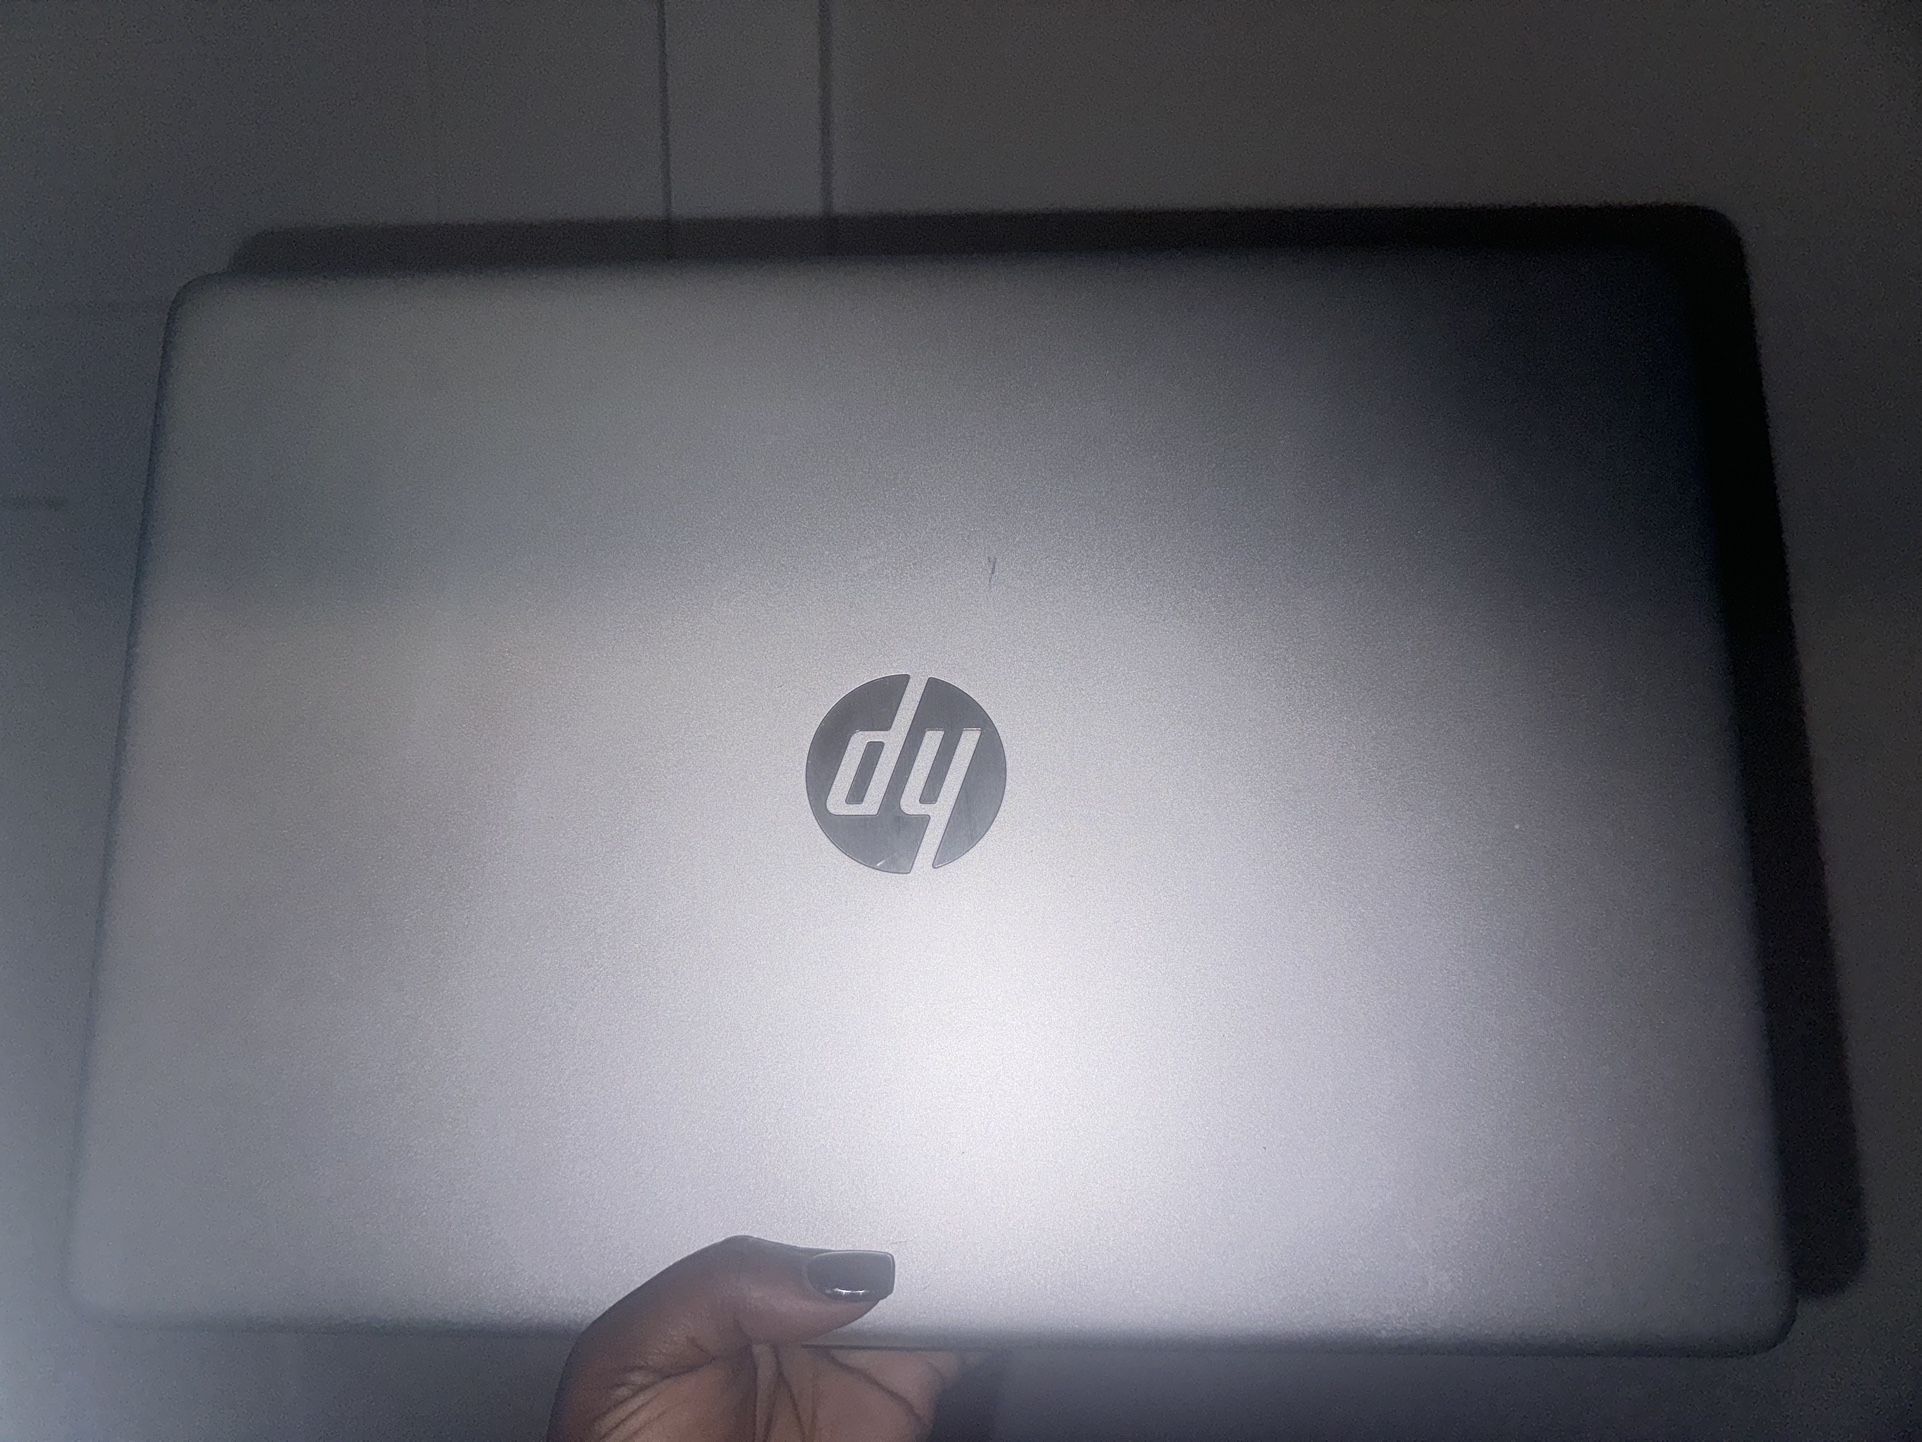 HP Touch screen Laptop